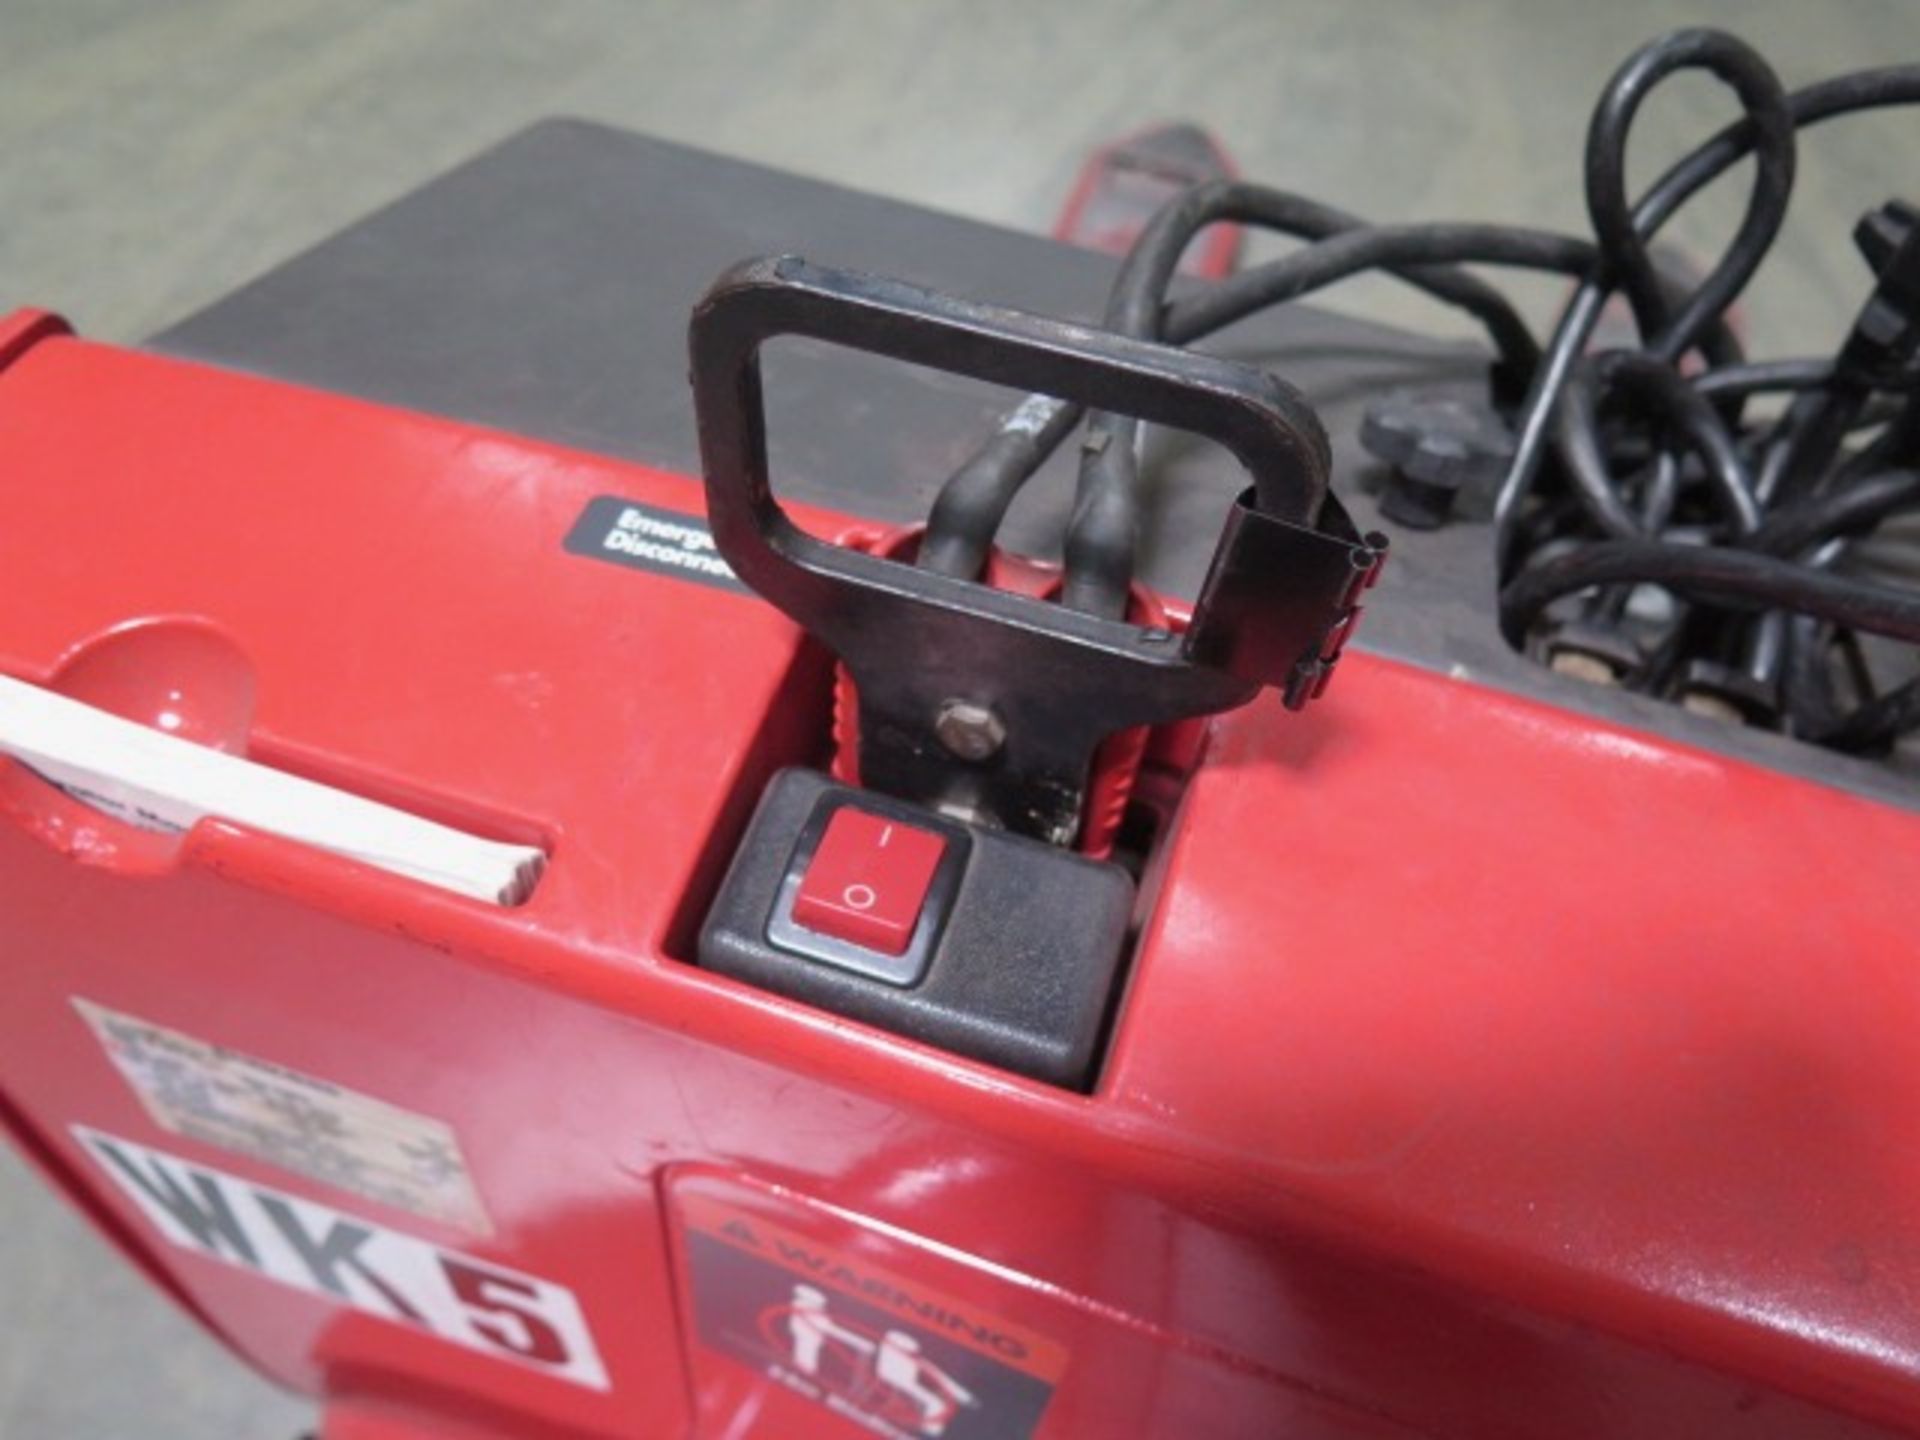 2015 Raymond Pallet Truck Model 102T-F45L Electric Pallet Truck, S/N 102-15-3520 | Rig Fee: $100 - Image 7 of 9